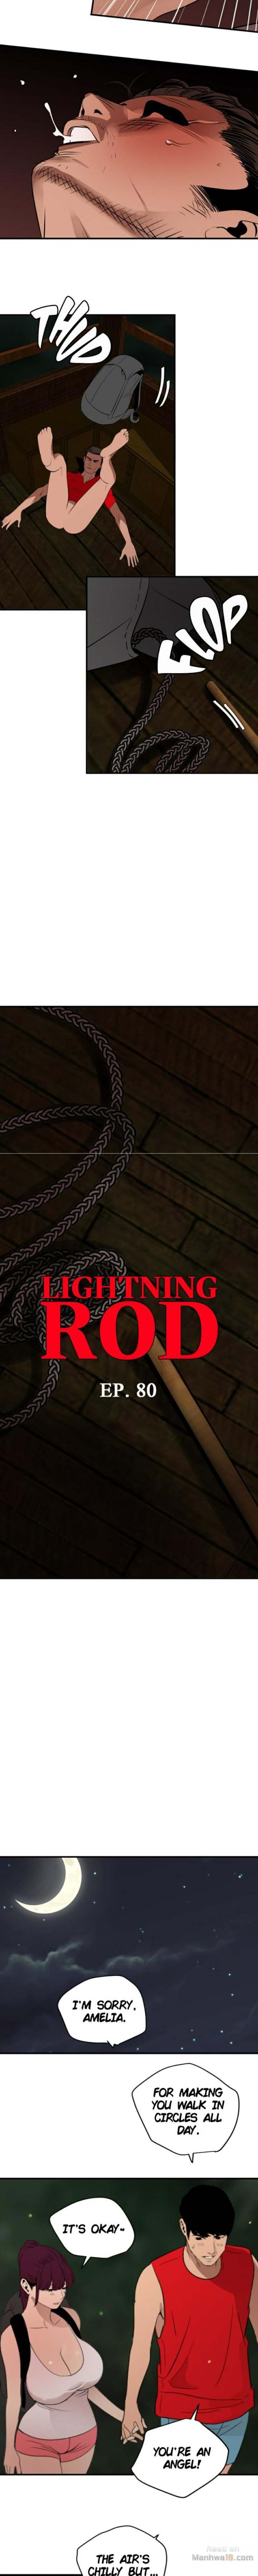 Lightning Rod Chapter 80 - Page 3